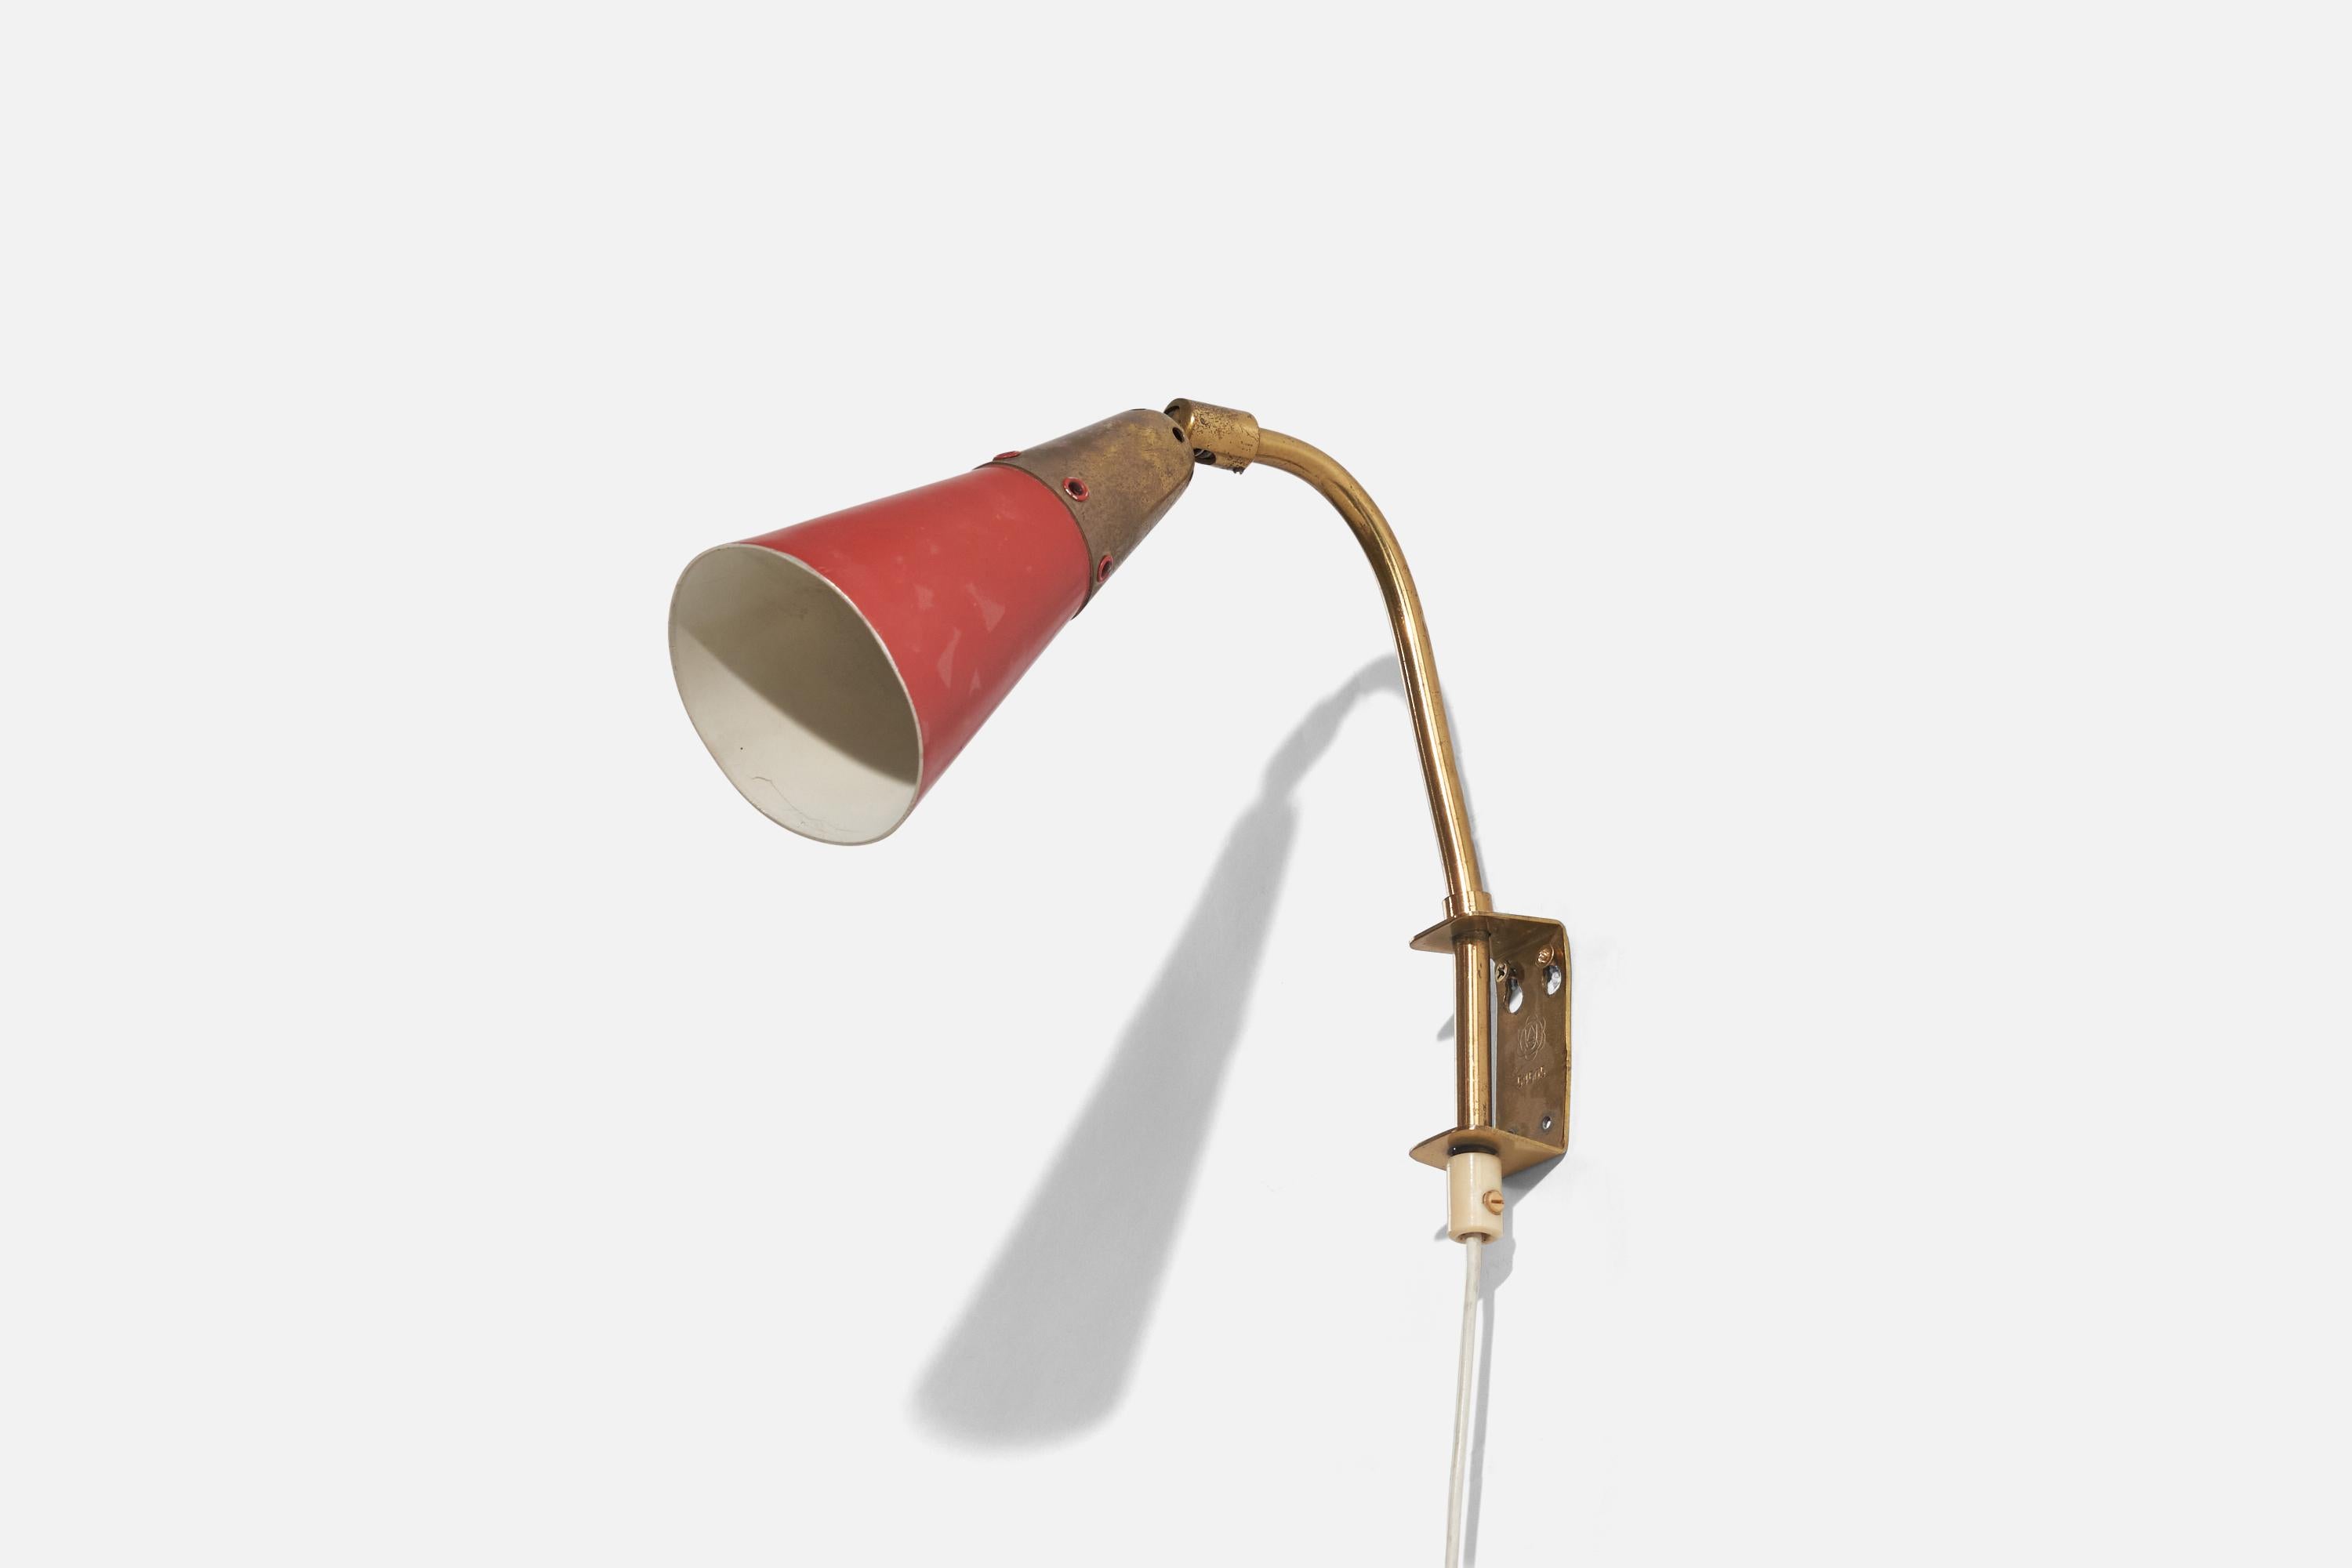 A brass and red lacquered metal wall light designed and produced in Sweden, c. 1940s.

Variable dimensions, measured as illustrated in the first image.
 